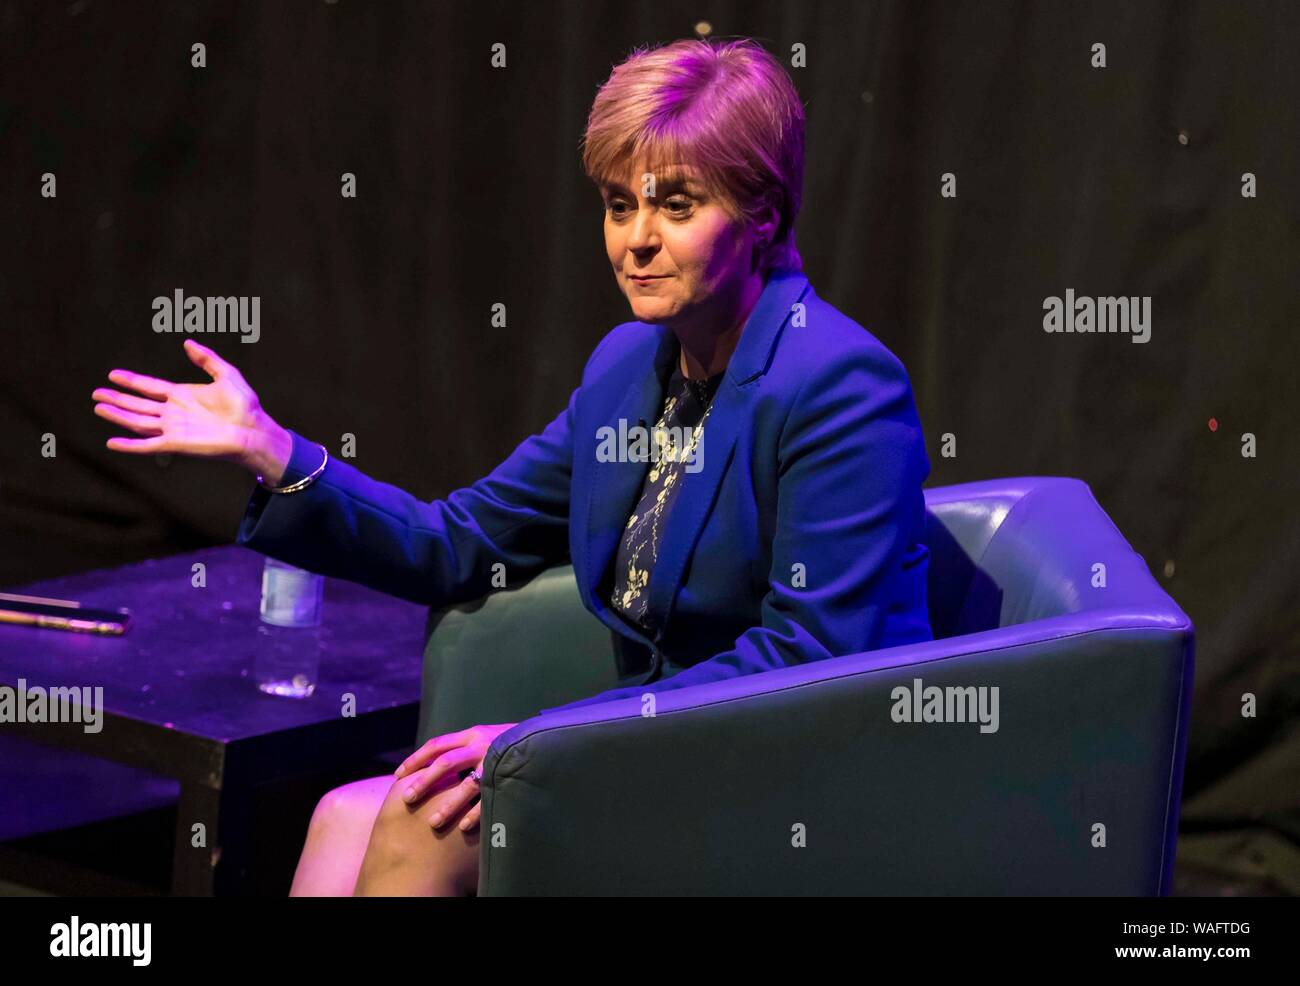 Edinburgh, Scotland, UK. 20th Aug, 2019. Scotland’s First Minister, Nicola Sturgeon, is interviewed by Matt Forde at the Edinburgh Fringe Festival.  During the hour long interview the FM said if the UK crashed out of the EU with No Deal that Jeremy Corbyn should shoulder part of the blame. Credit: Rich Dyson/Alamy Live News Stock Photo